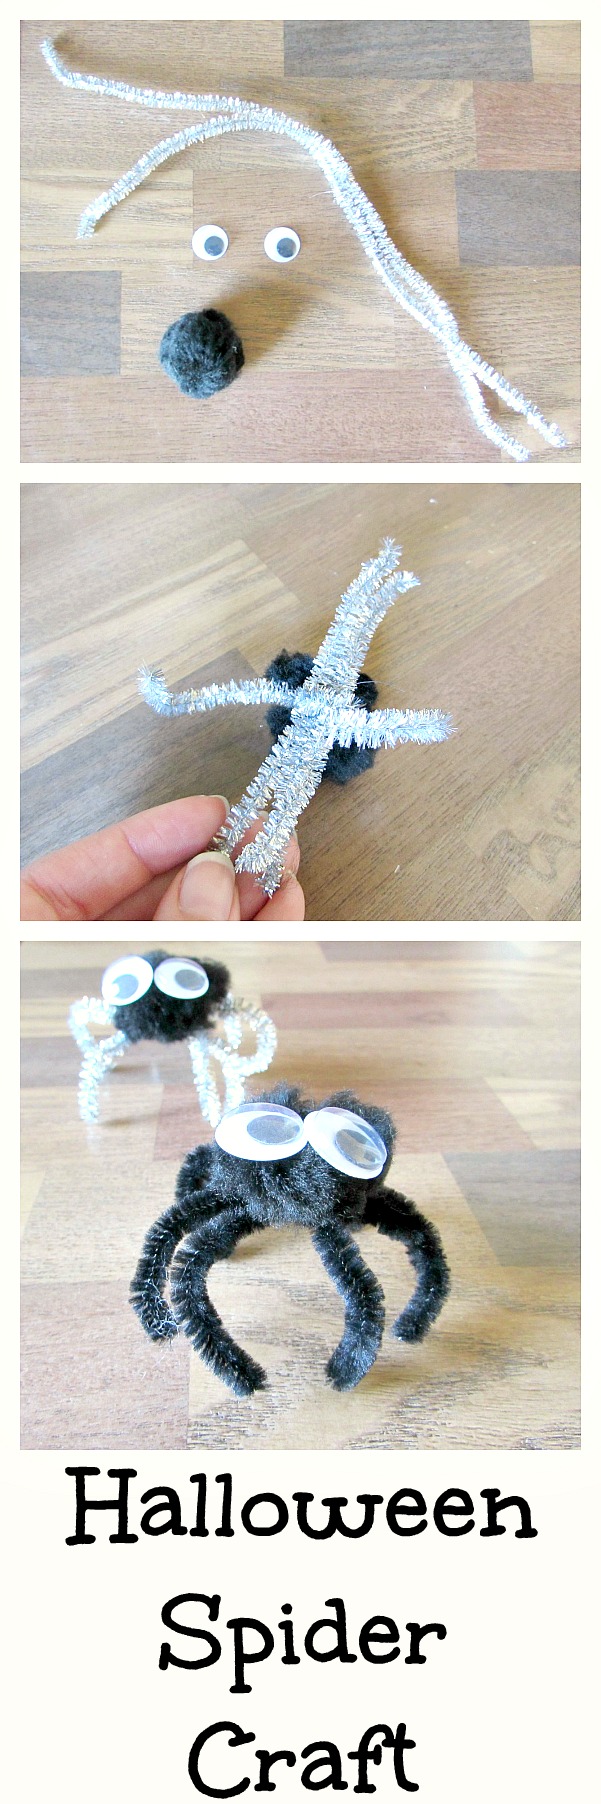 Halloween Spider Craft. Make the cutest spiders ever with this fun simple Halloween craft with kids